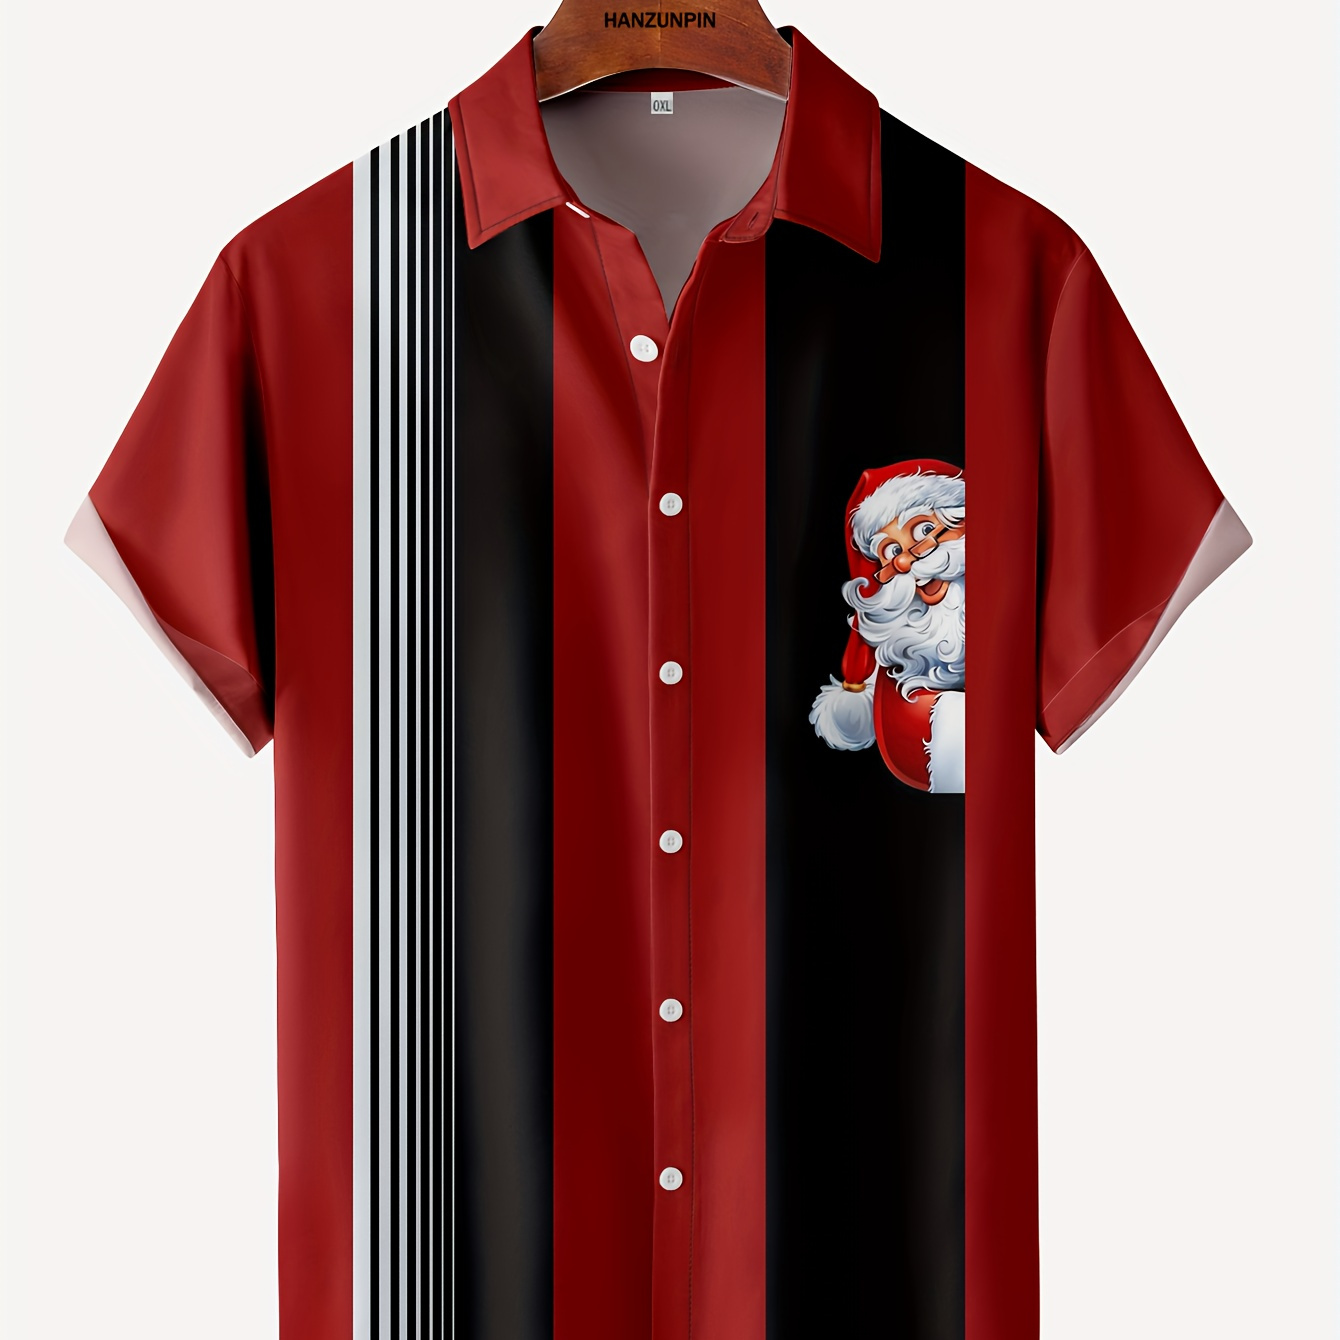 

Men's Plus Size Stripes & Naughty Santa Claus Graphic Print Shirt Oversized Short Sleeve Shirt For Christmas Party, Men's Clothing